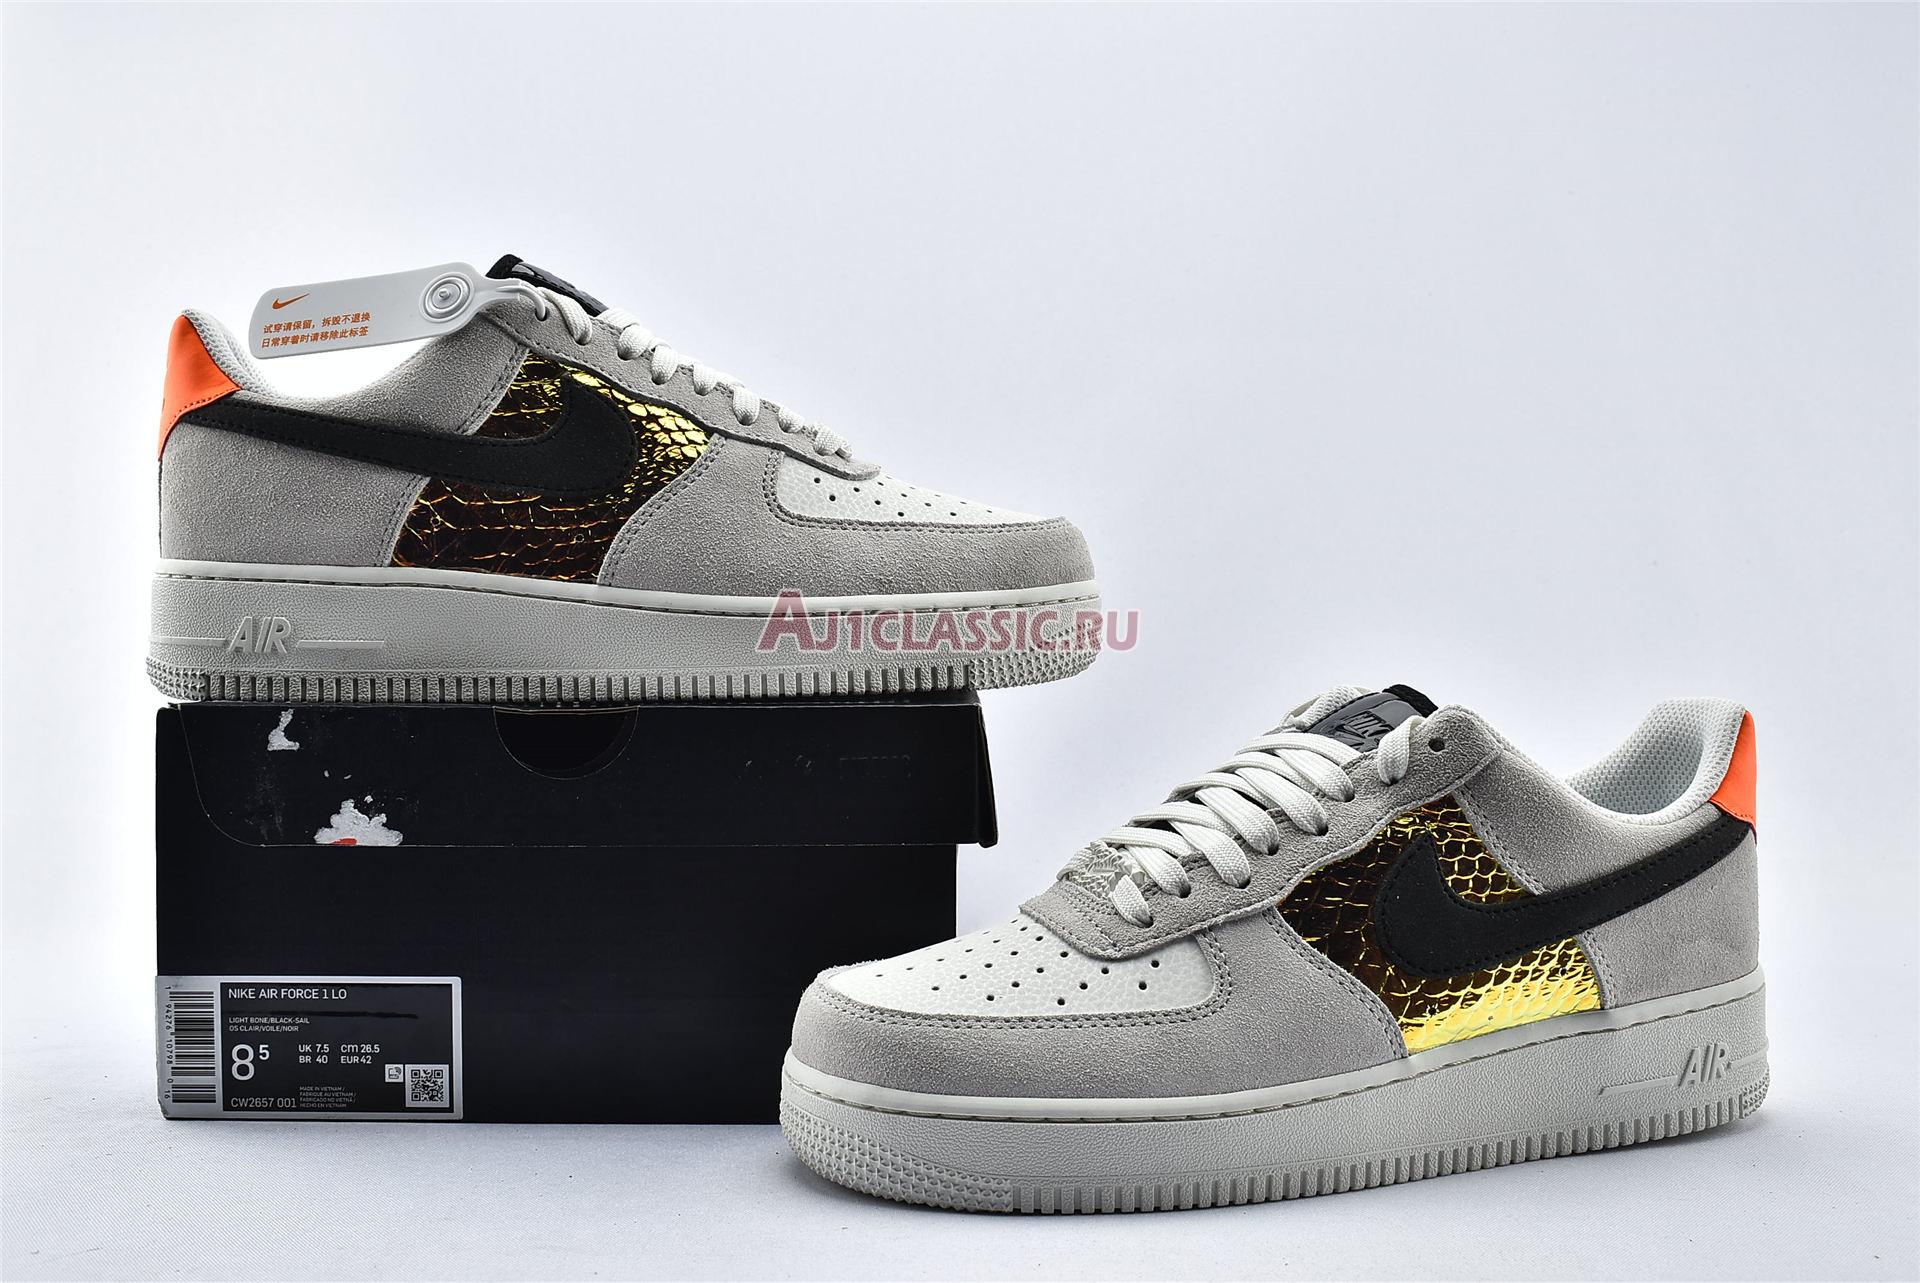 Nike Air Force 1 Low "Iridescent Snakeskin" CW2657-001